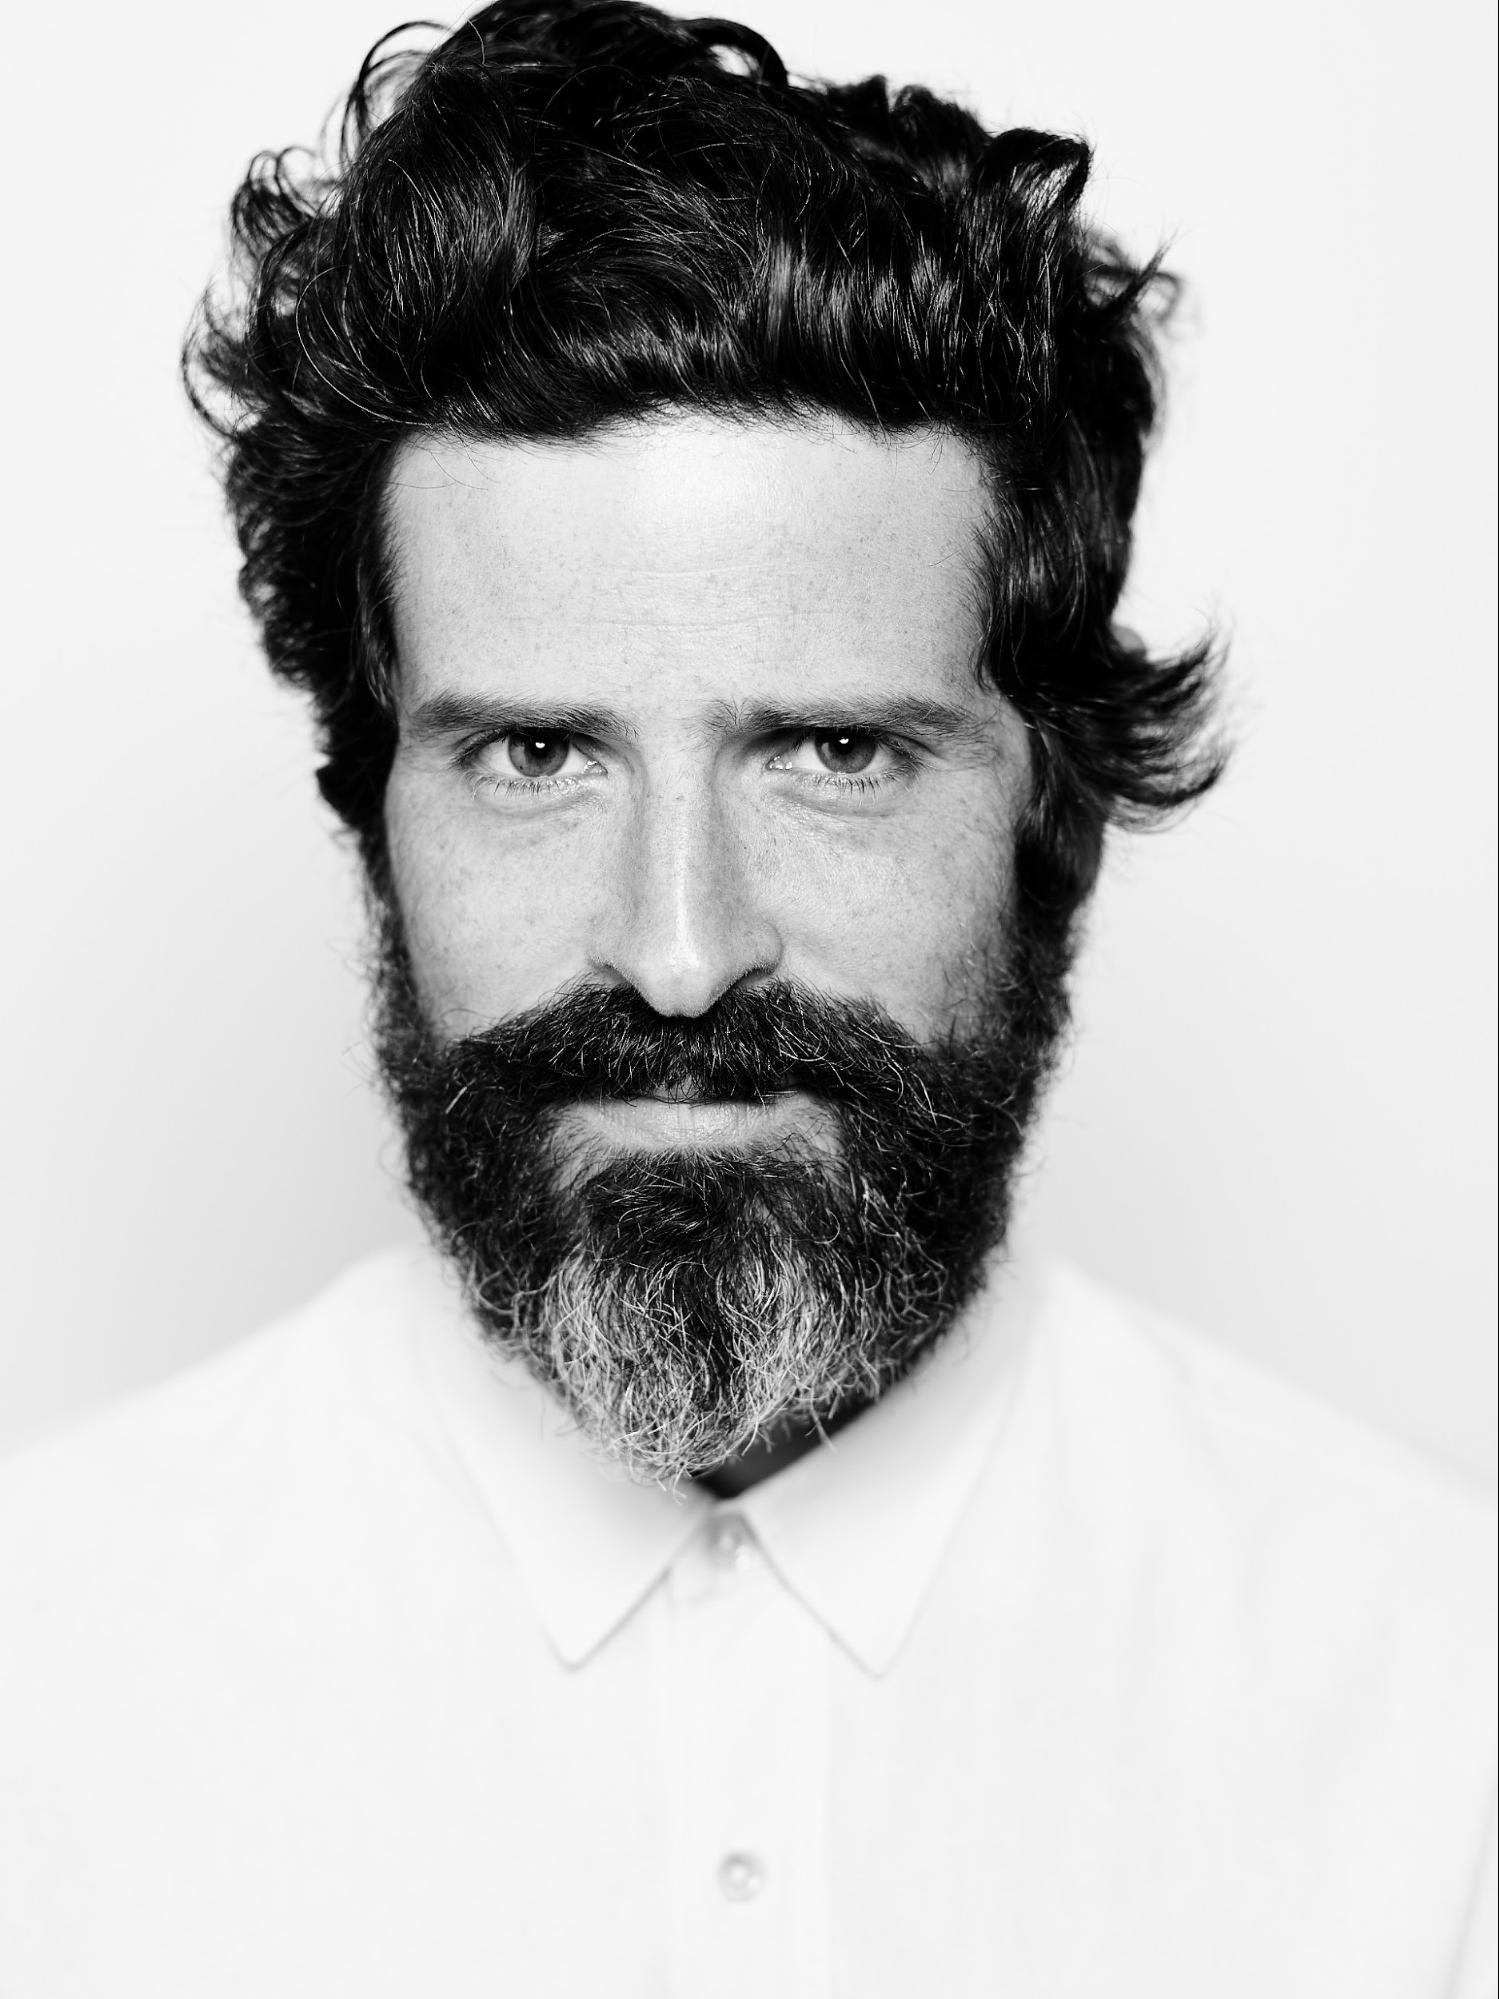 Product of Environment: A Q&A With Devendra Banhart